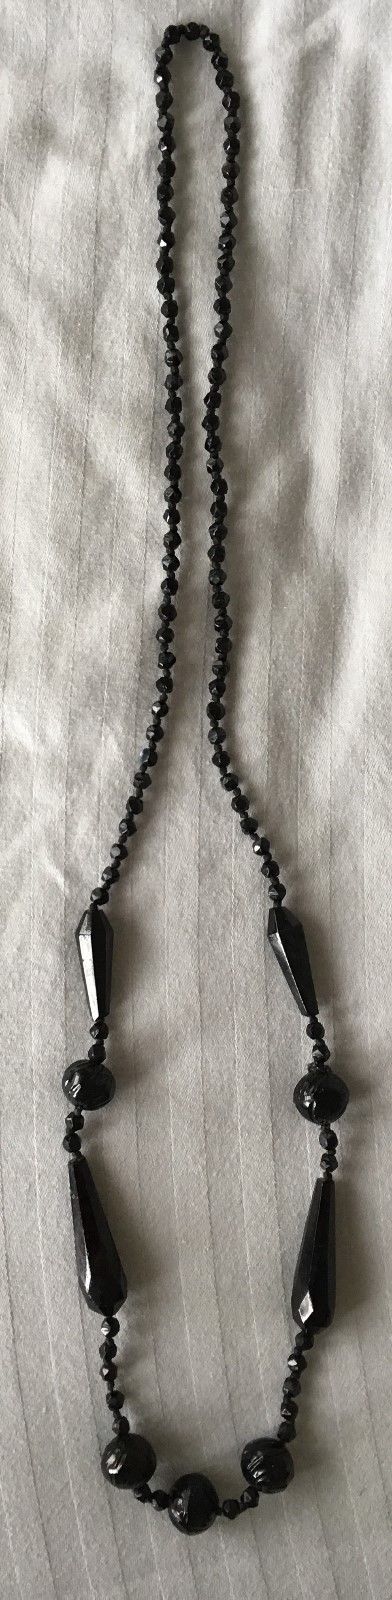 French Jet Necklace Antique Black Glass